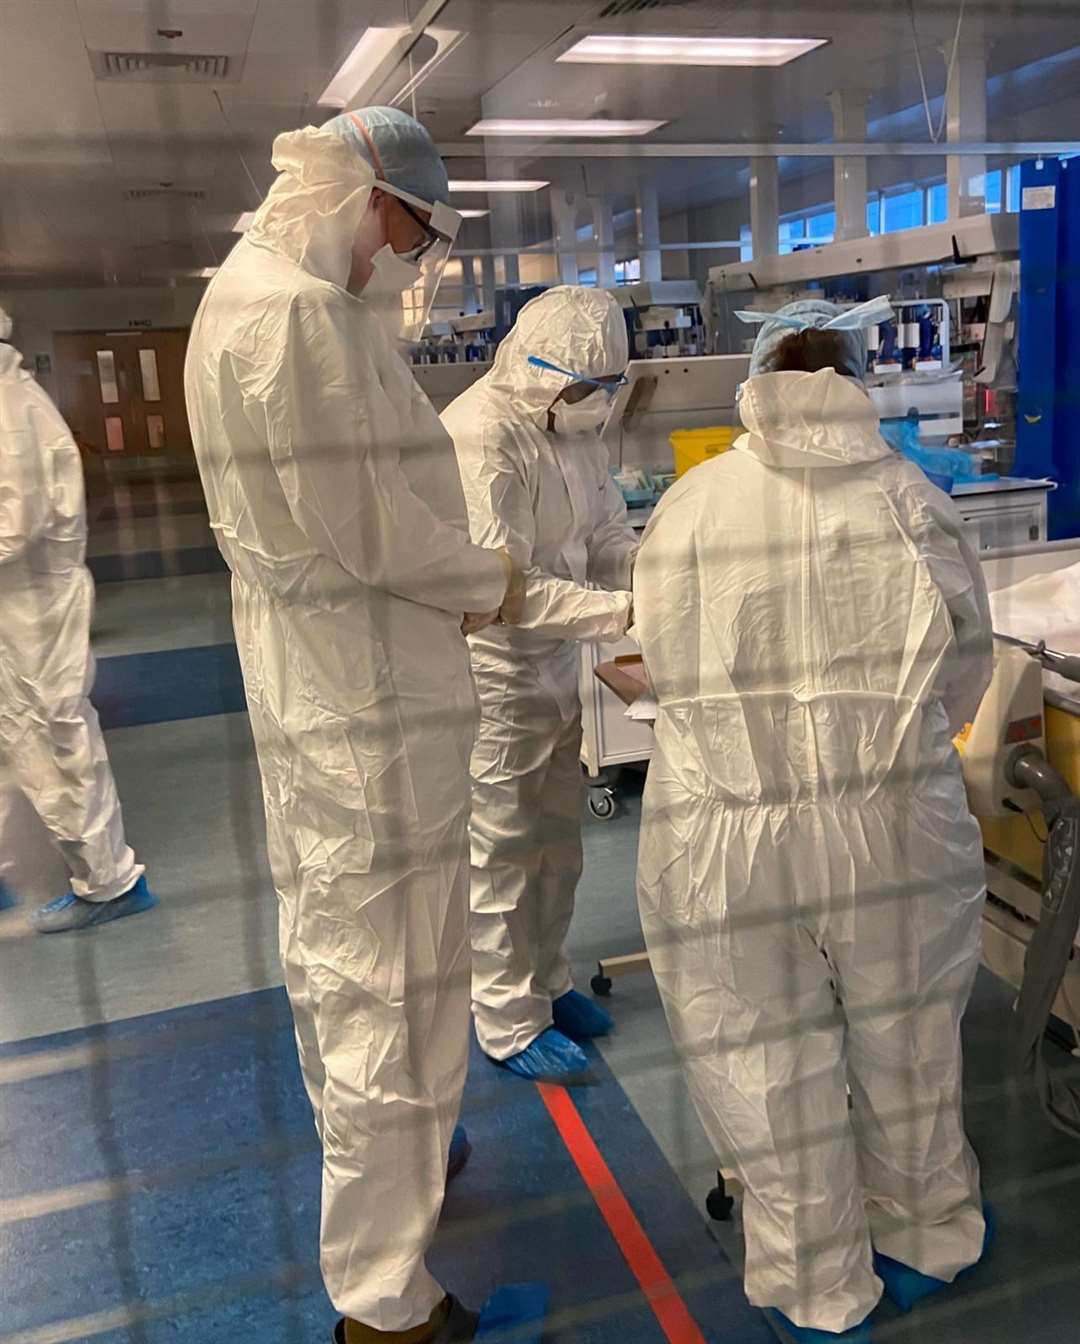 NHS staff treating Covid-19 positive patients while wearing PPE